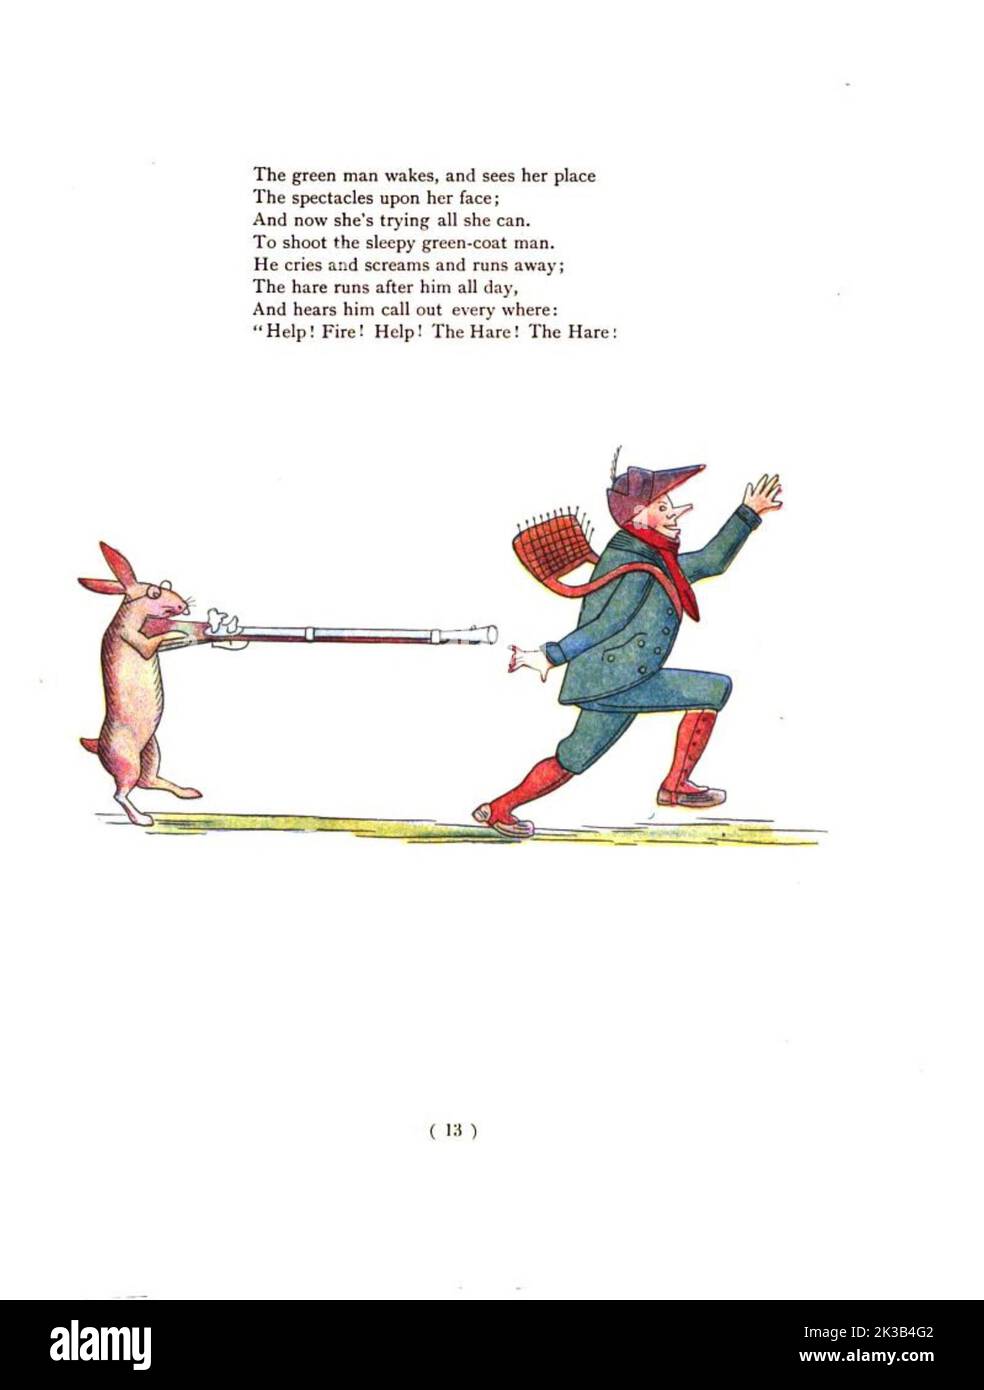 The Story of the Man that went out Shooting. from ' The Struwwelpeter painting book ' Pretty Stories and Funny Pictures for Little Children by Heinrich Hoffmann Published in London in 1900 Stock Photo